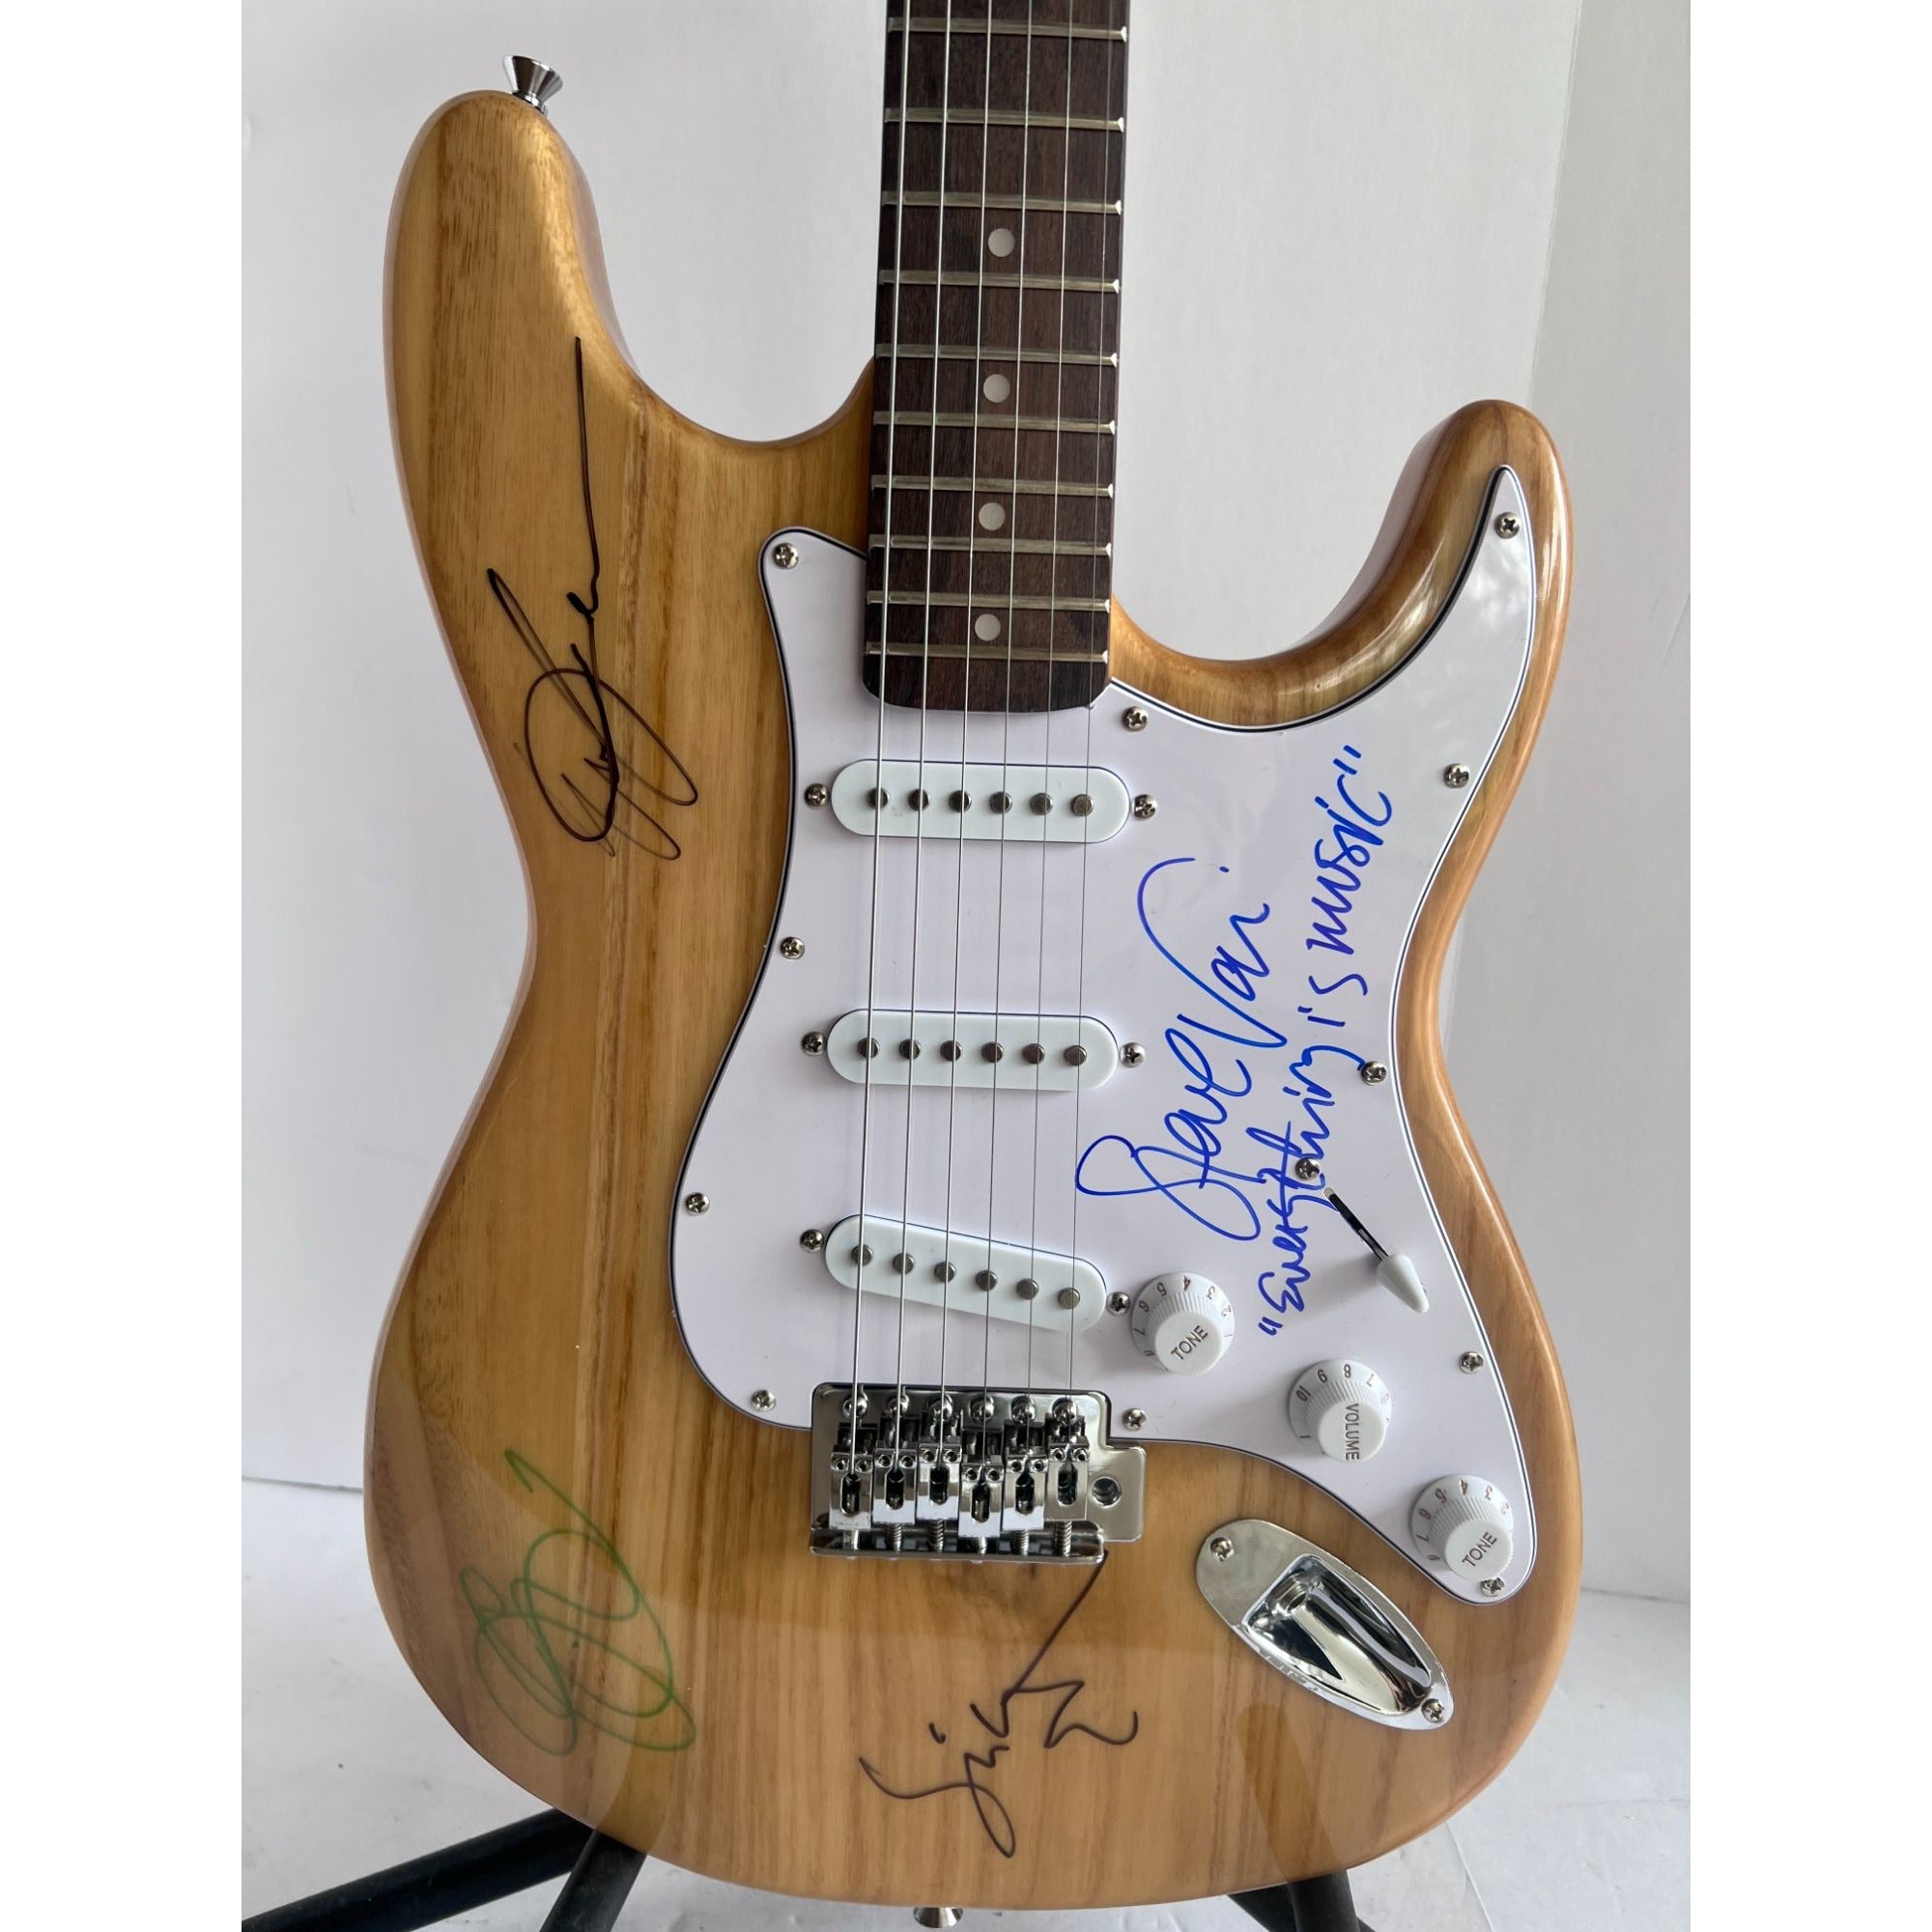 Stevie Vai Eric Johnson Joe Satariaini Yngwie Malmsteen Stratocaster Huntington full size electric guitar signed with proof